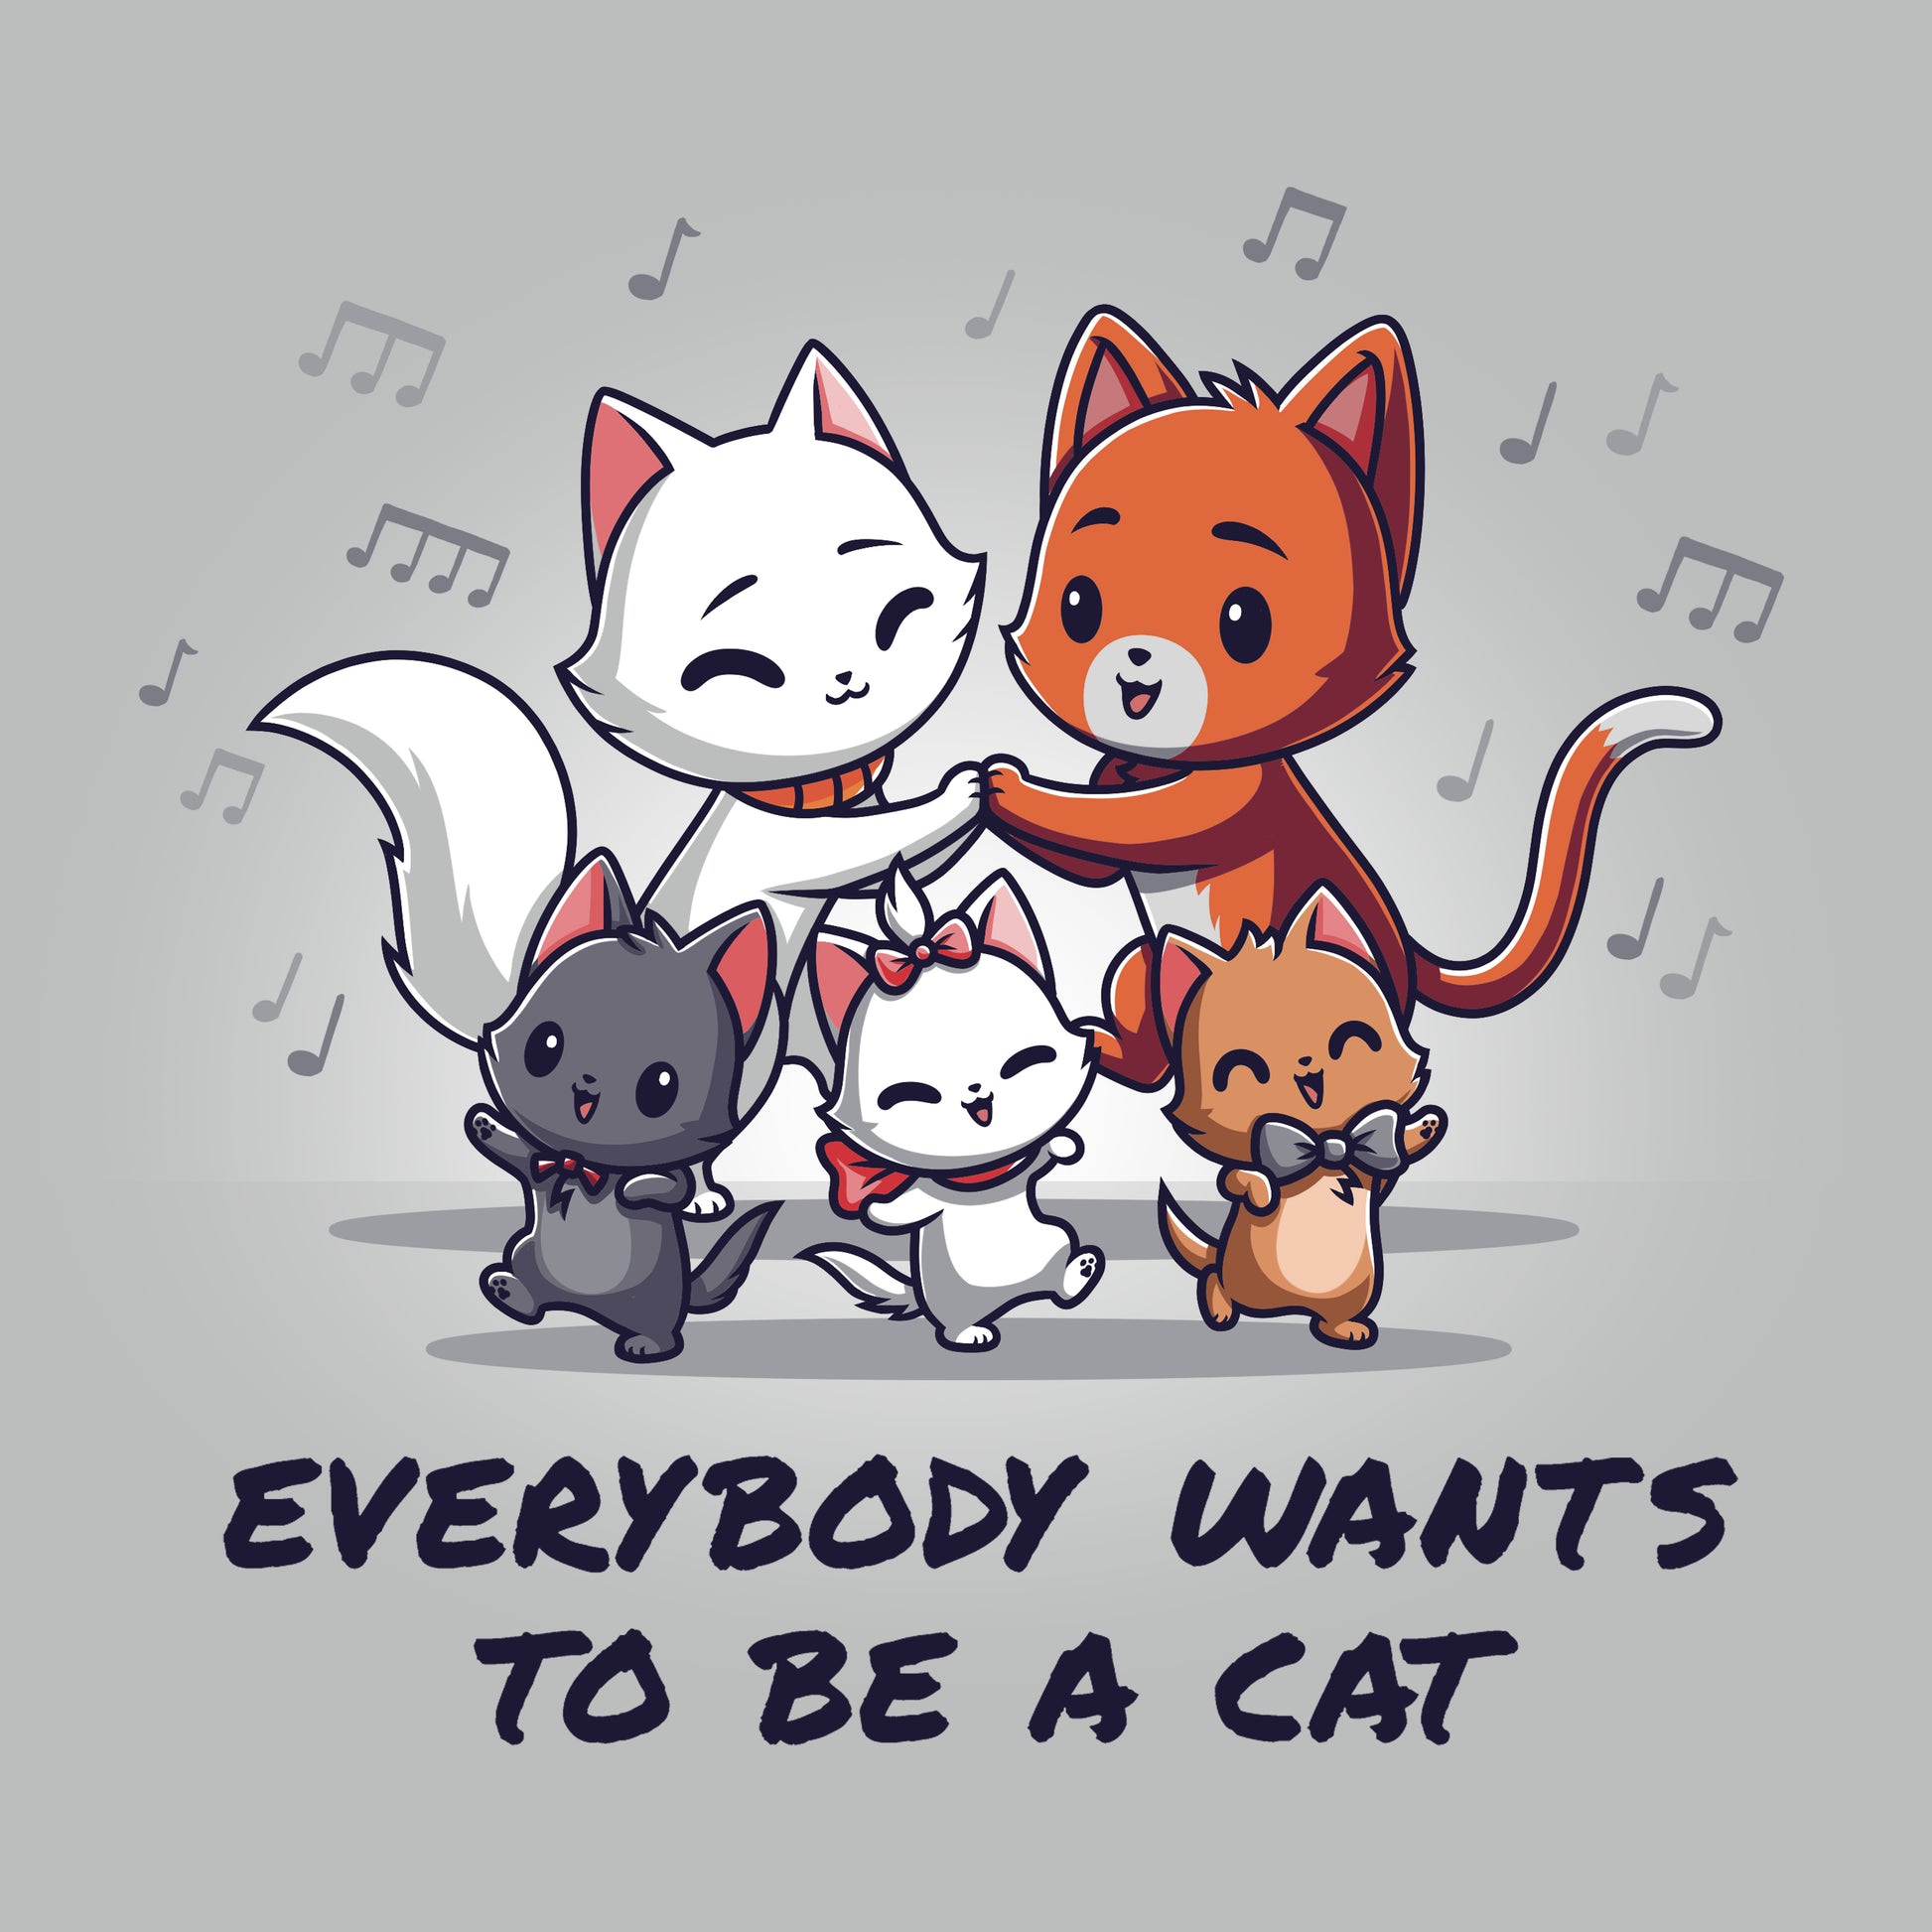 Officially licensed Disney Everybody Wants to Be a Cat T-shirt.